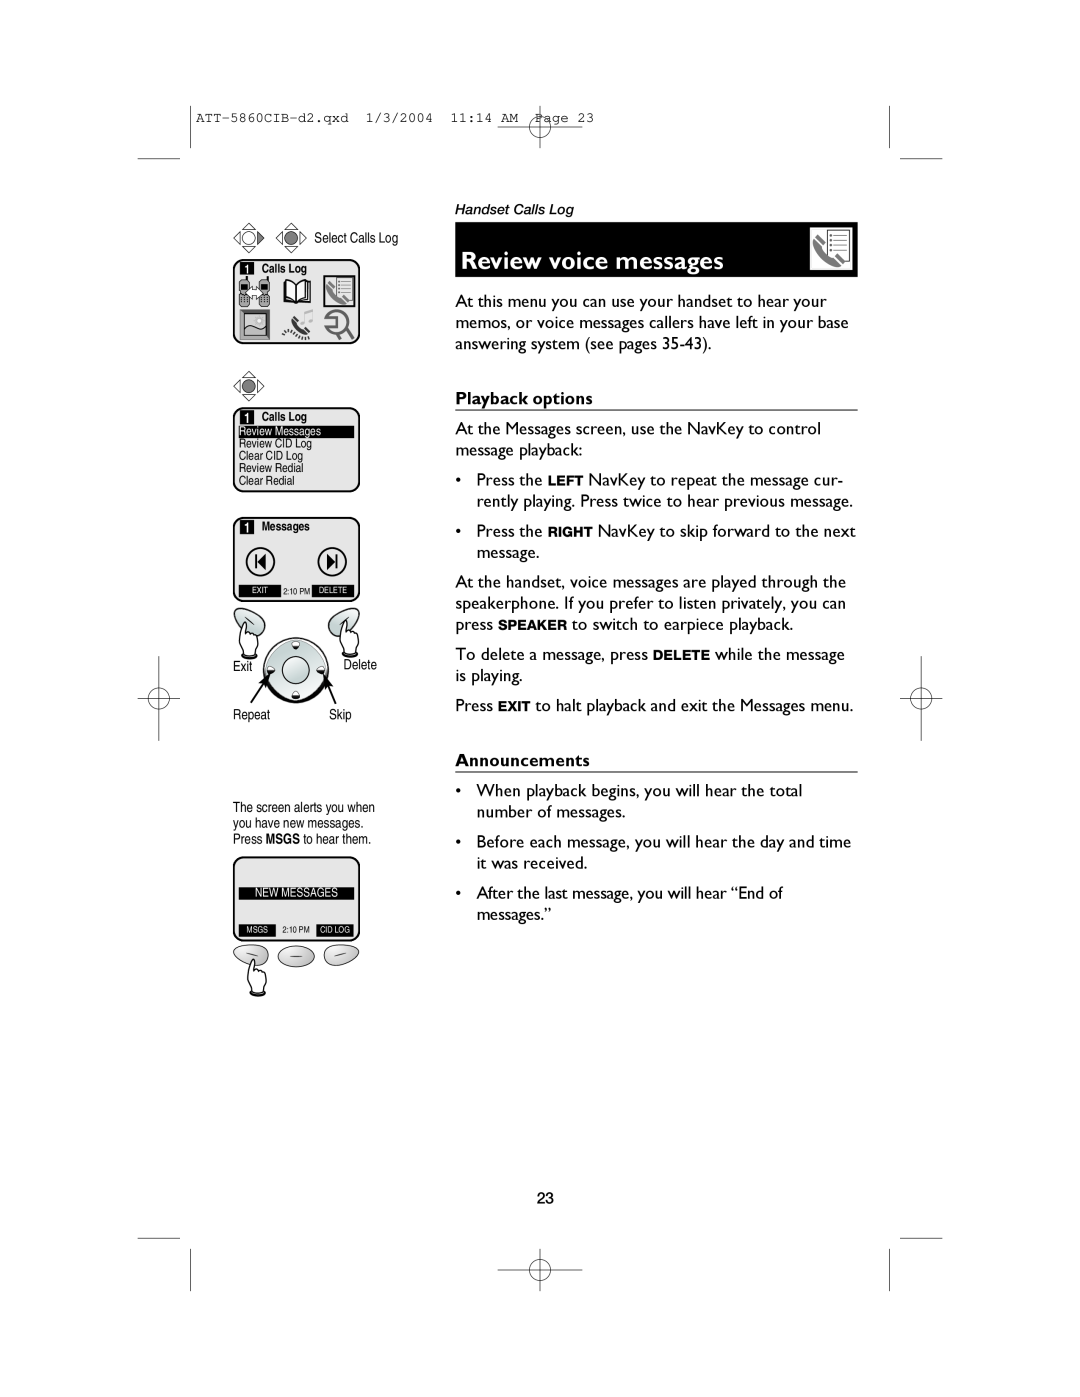 AT&T E5860 user manual Review voice messages, Playback options, Announcements 